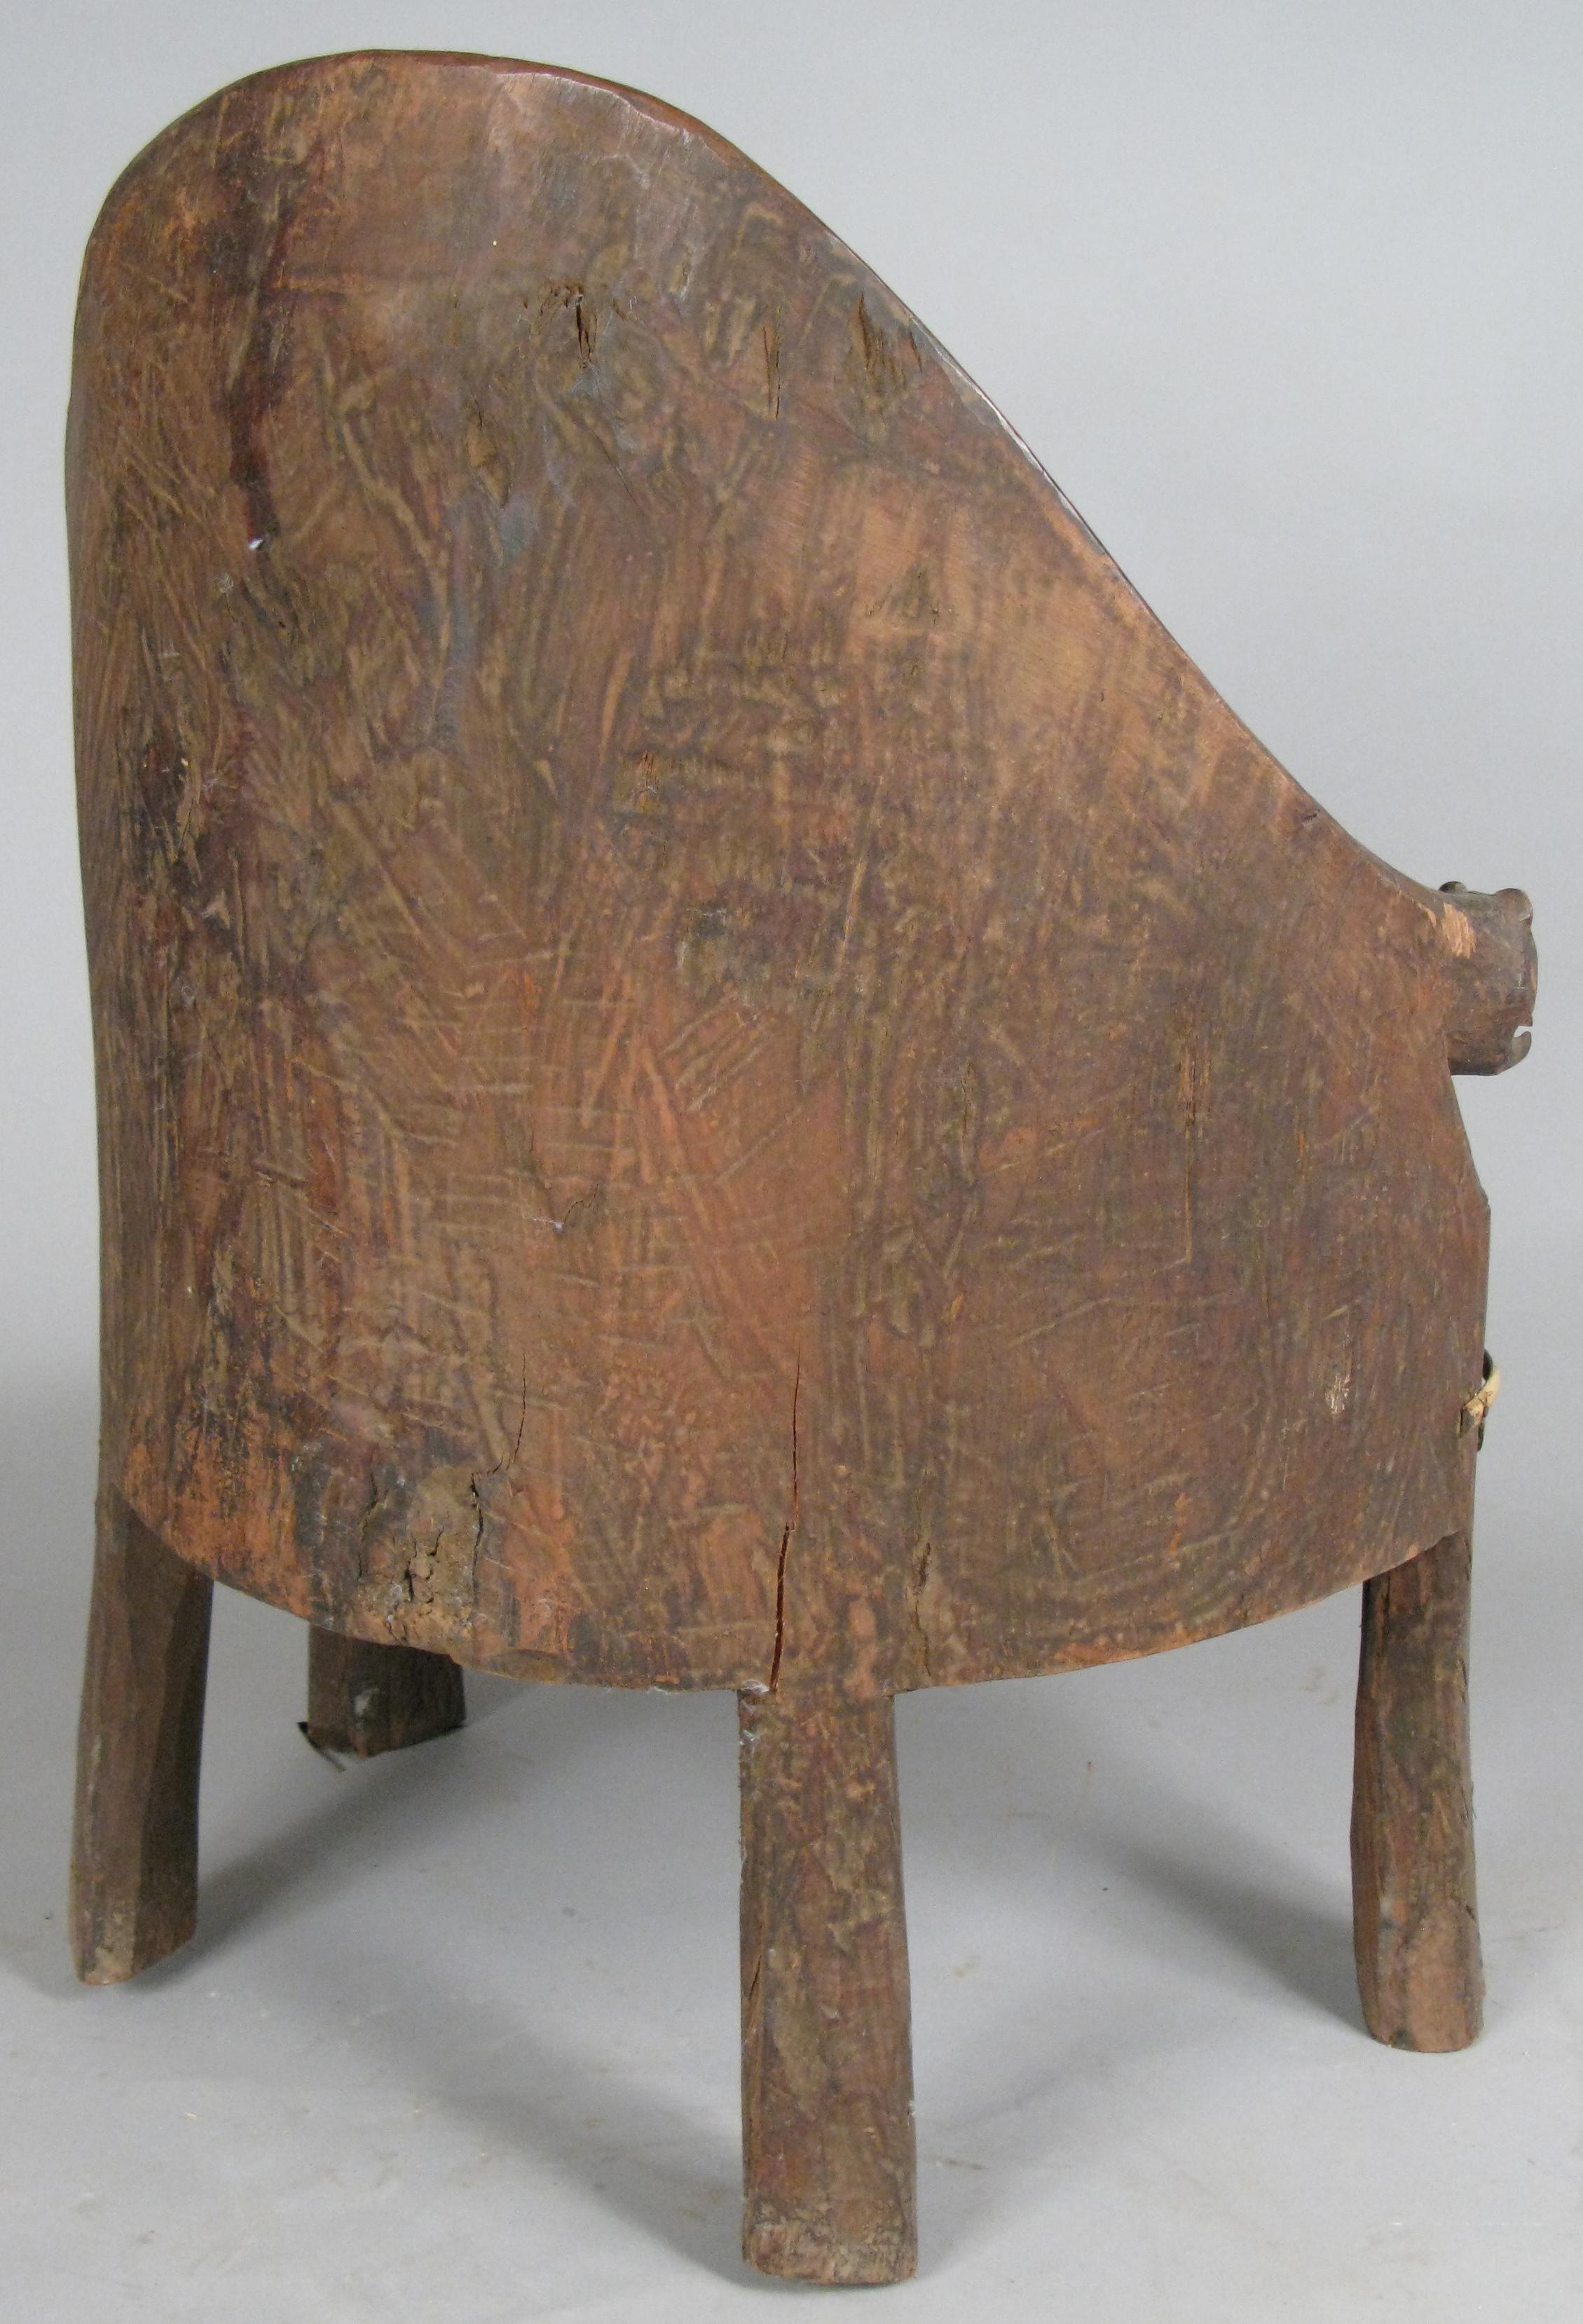 An outstanding chief's chair from Nagaland in northeast India. This chair, carved from a single piece of wood, has a curved back and is detailed with carved motifs around the seat, carved heads at the ends of the arms, and is decorated with